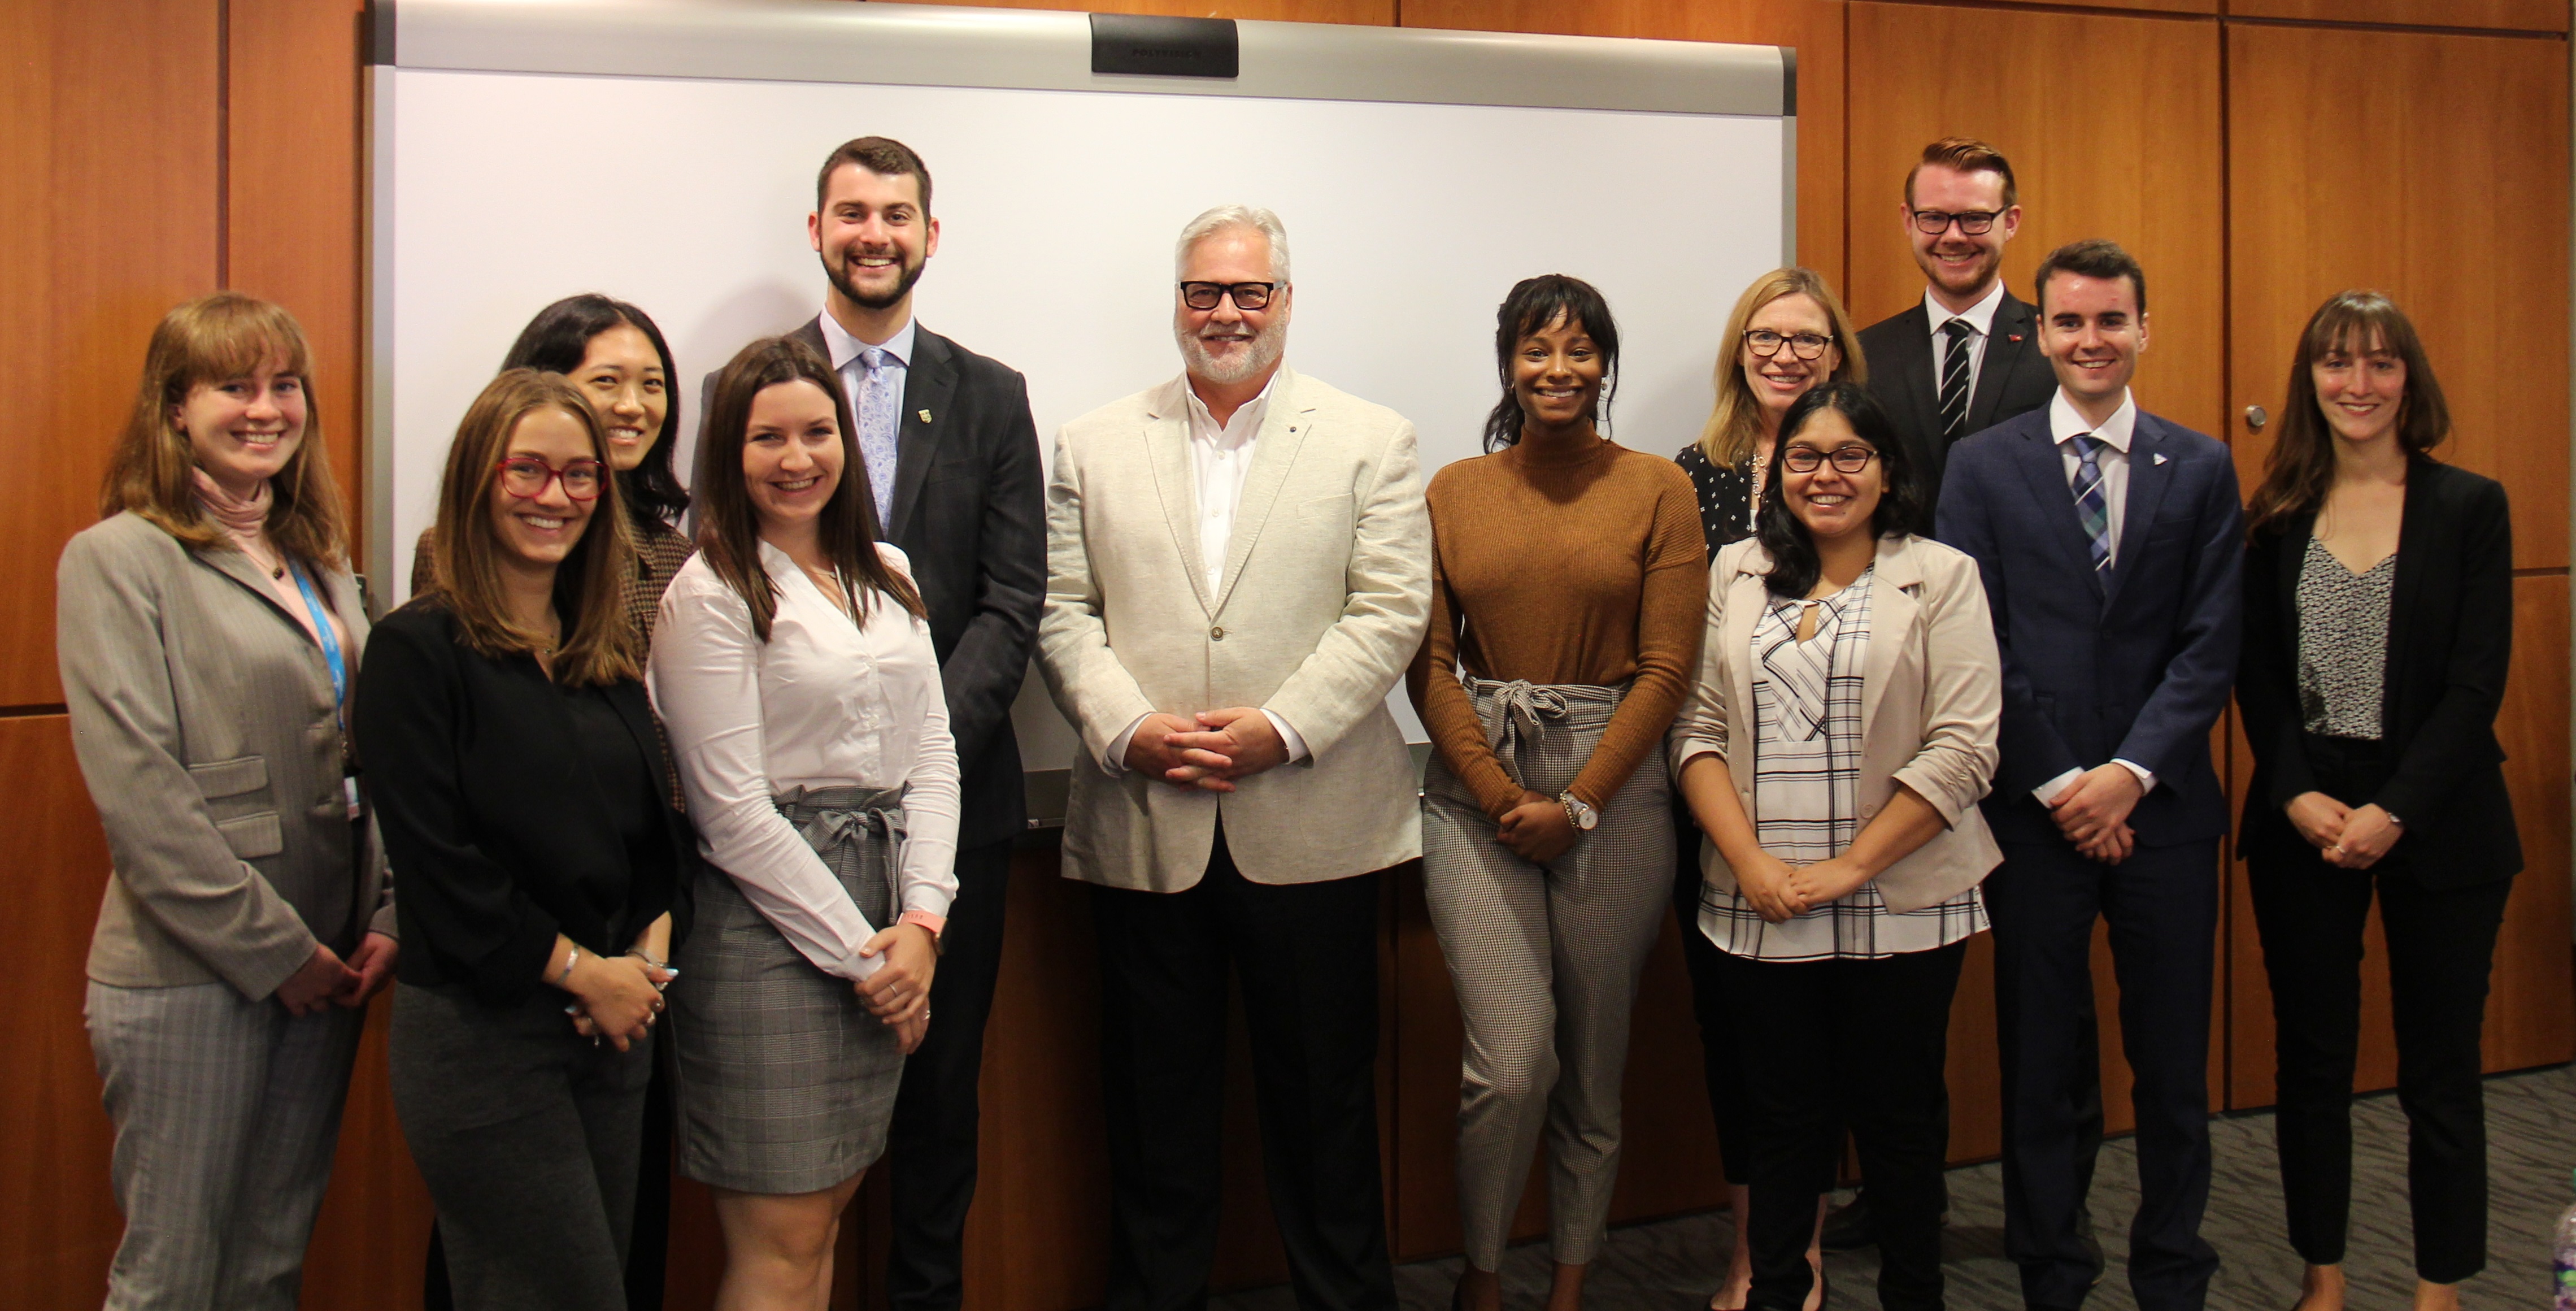 Ombudsman Paul Dubé welcomes members of the 2019 Ontario Legislature Internship Programme to our Office.